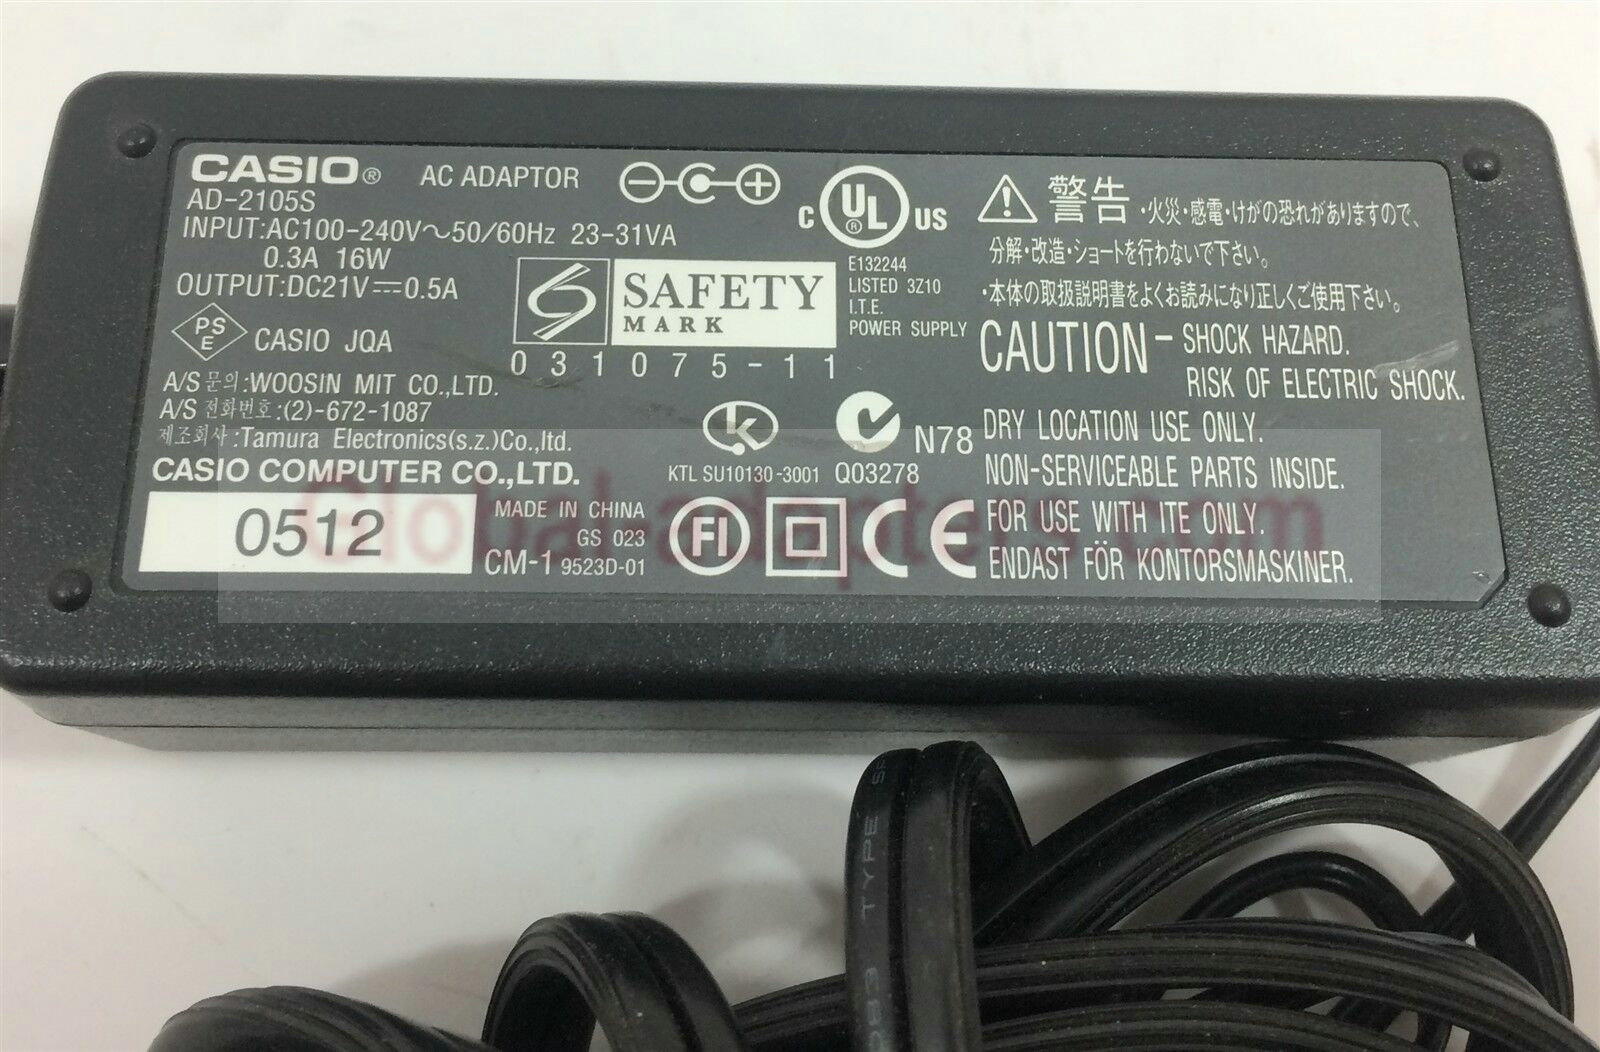 New 21V 0.5A Casio AD-2105s Power Supply Ac Adapter